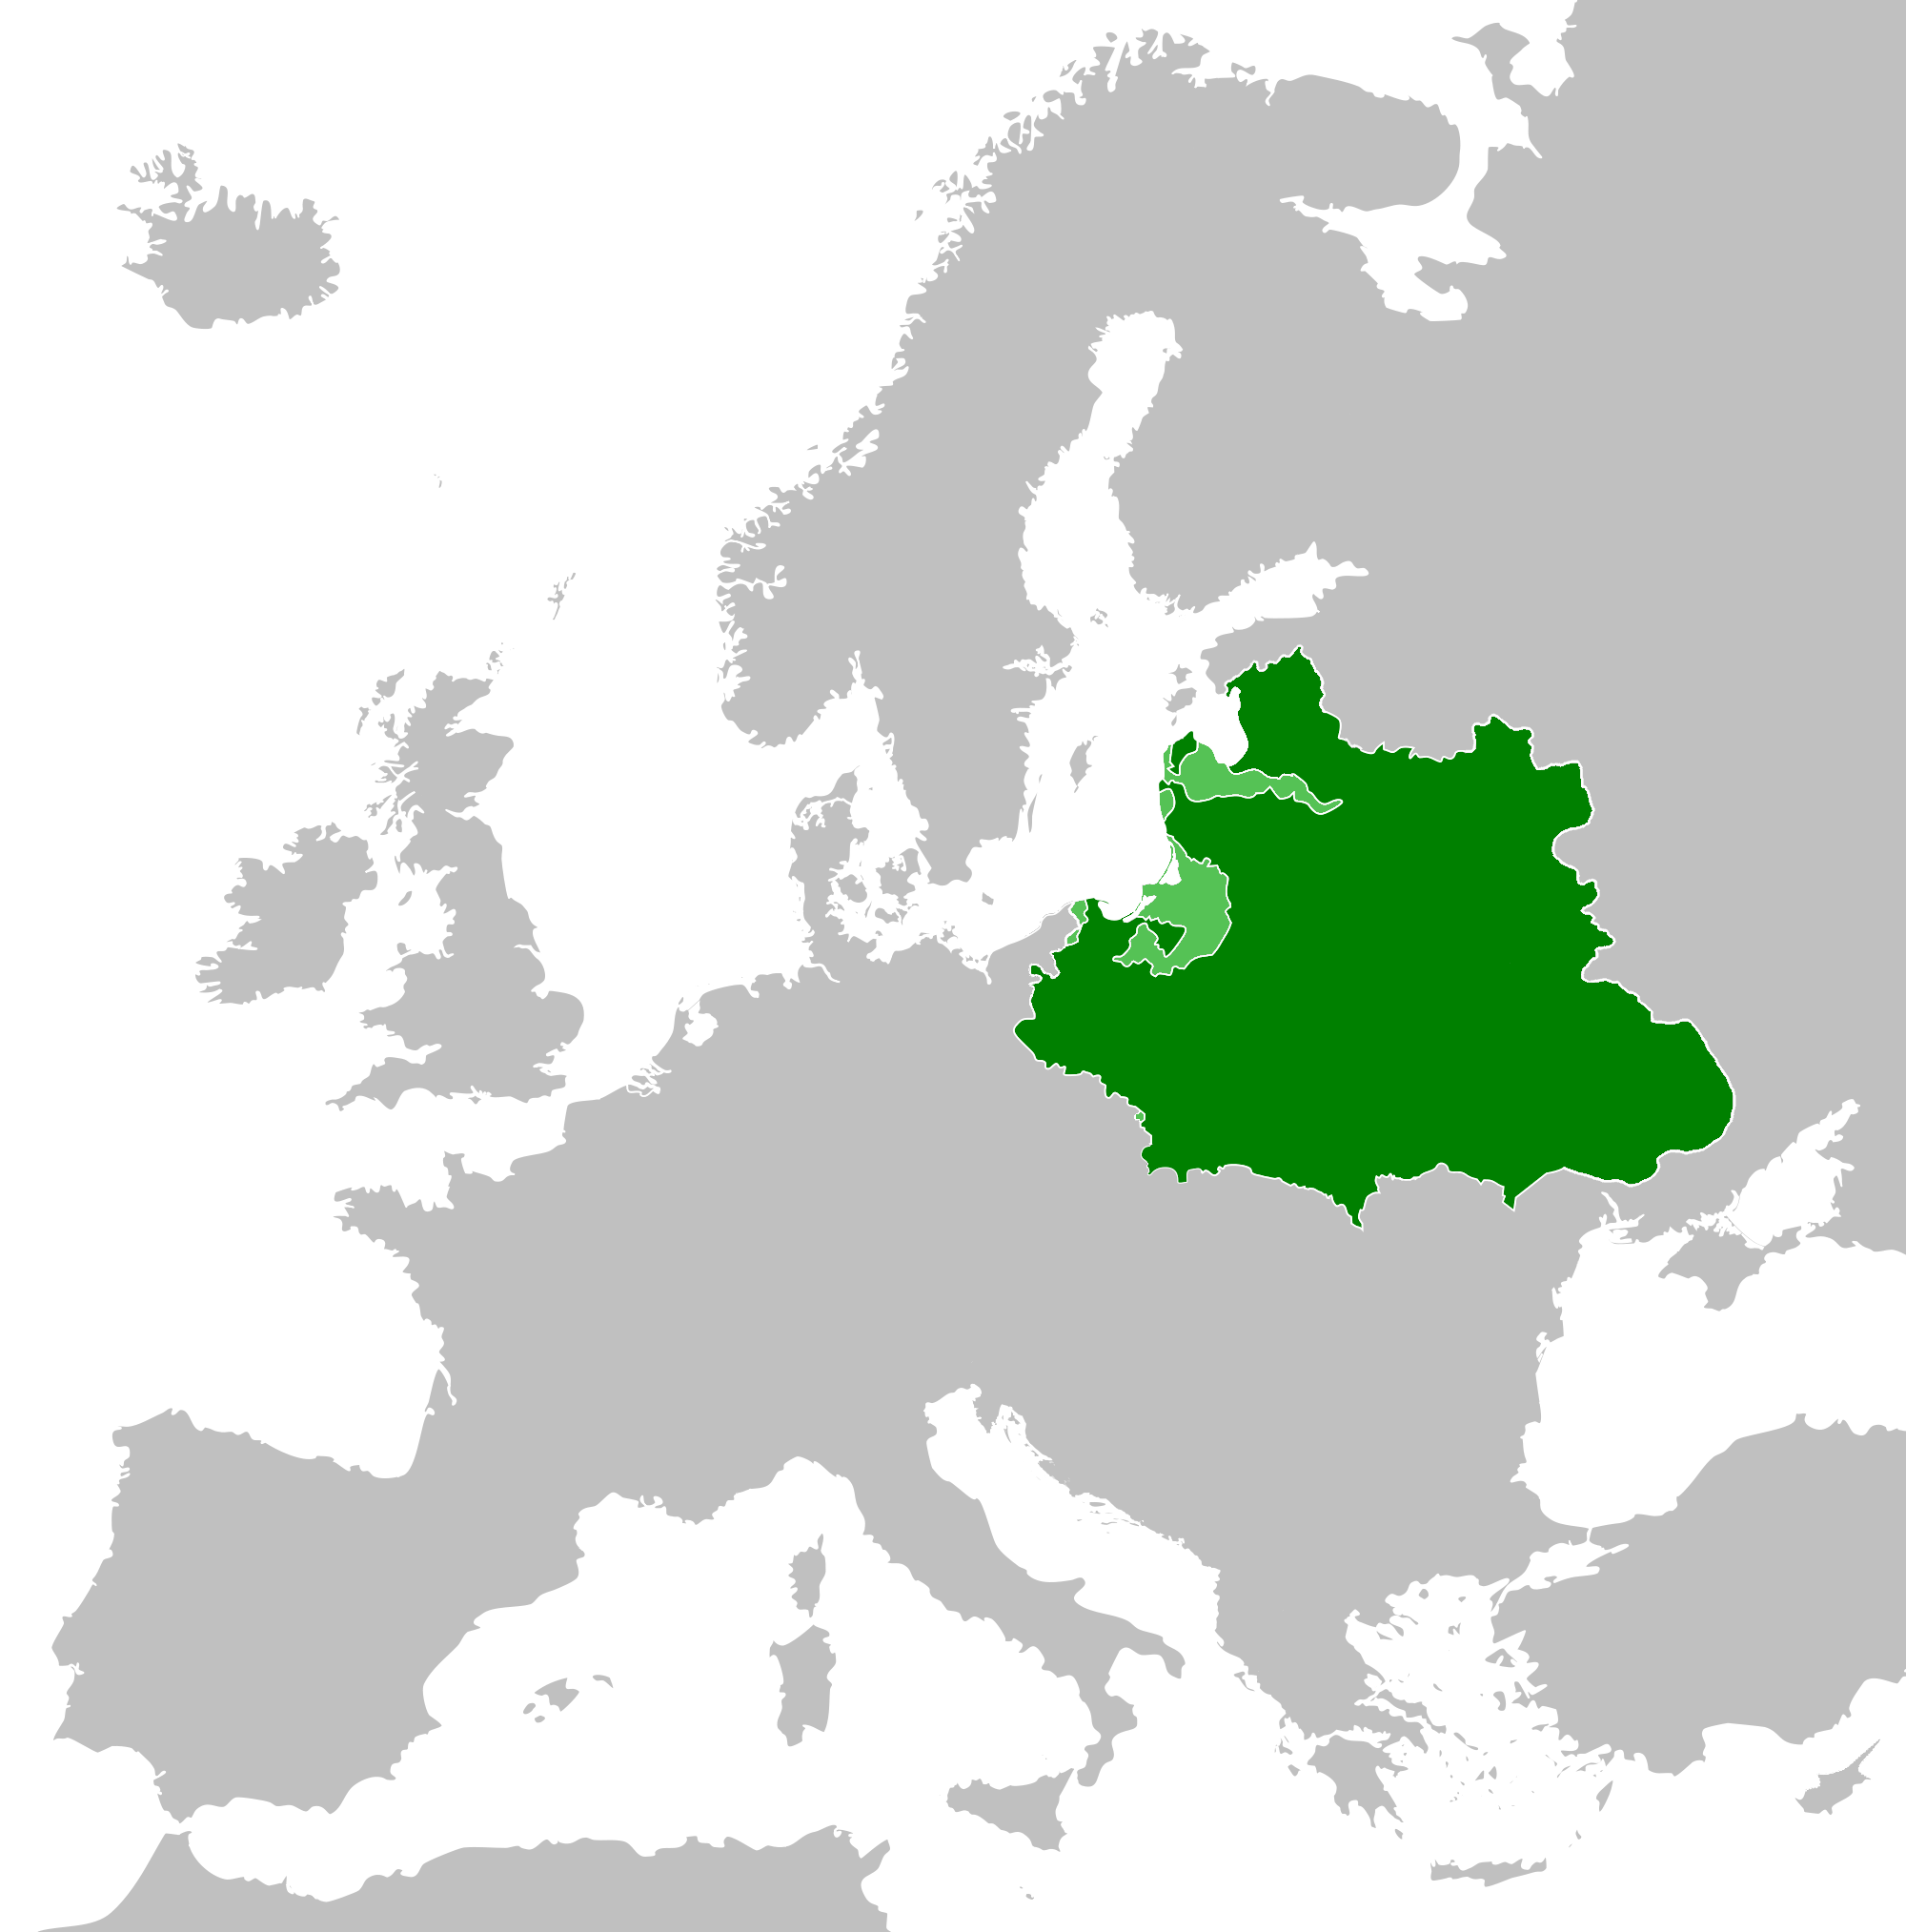 File:Poland–Lithuania map.png